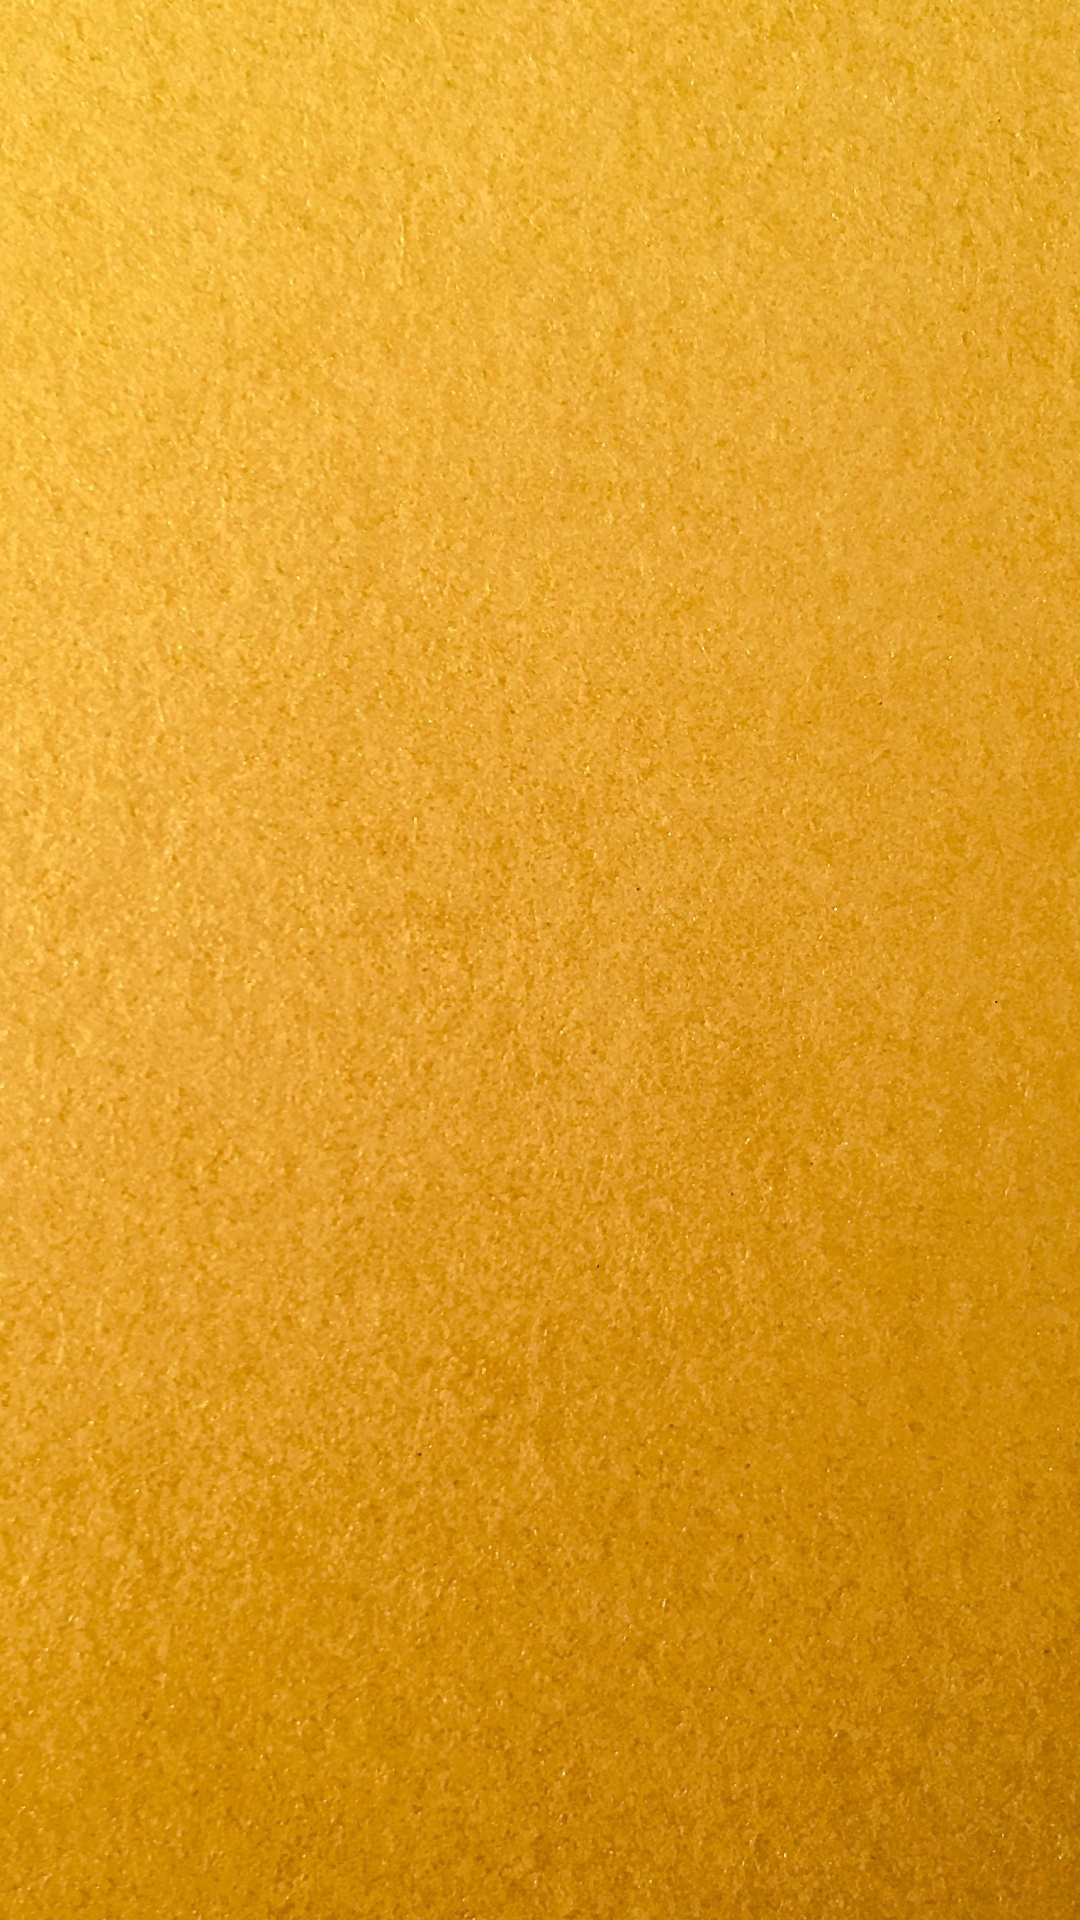 Yellow Textile in Close up Image. Wallpaper in 1080x1920 Resolution